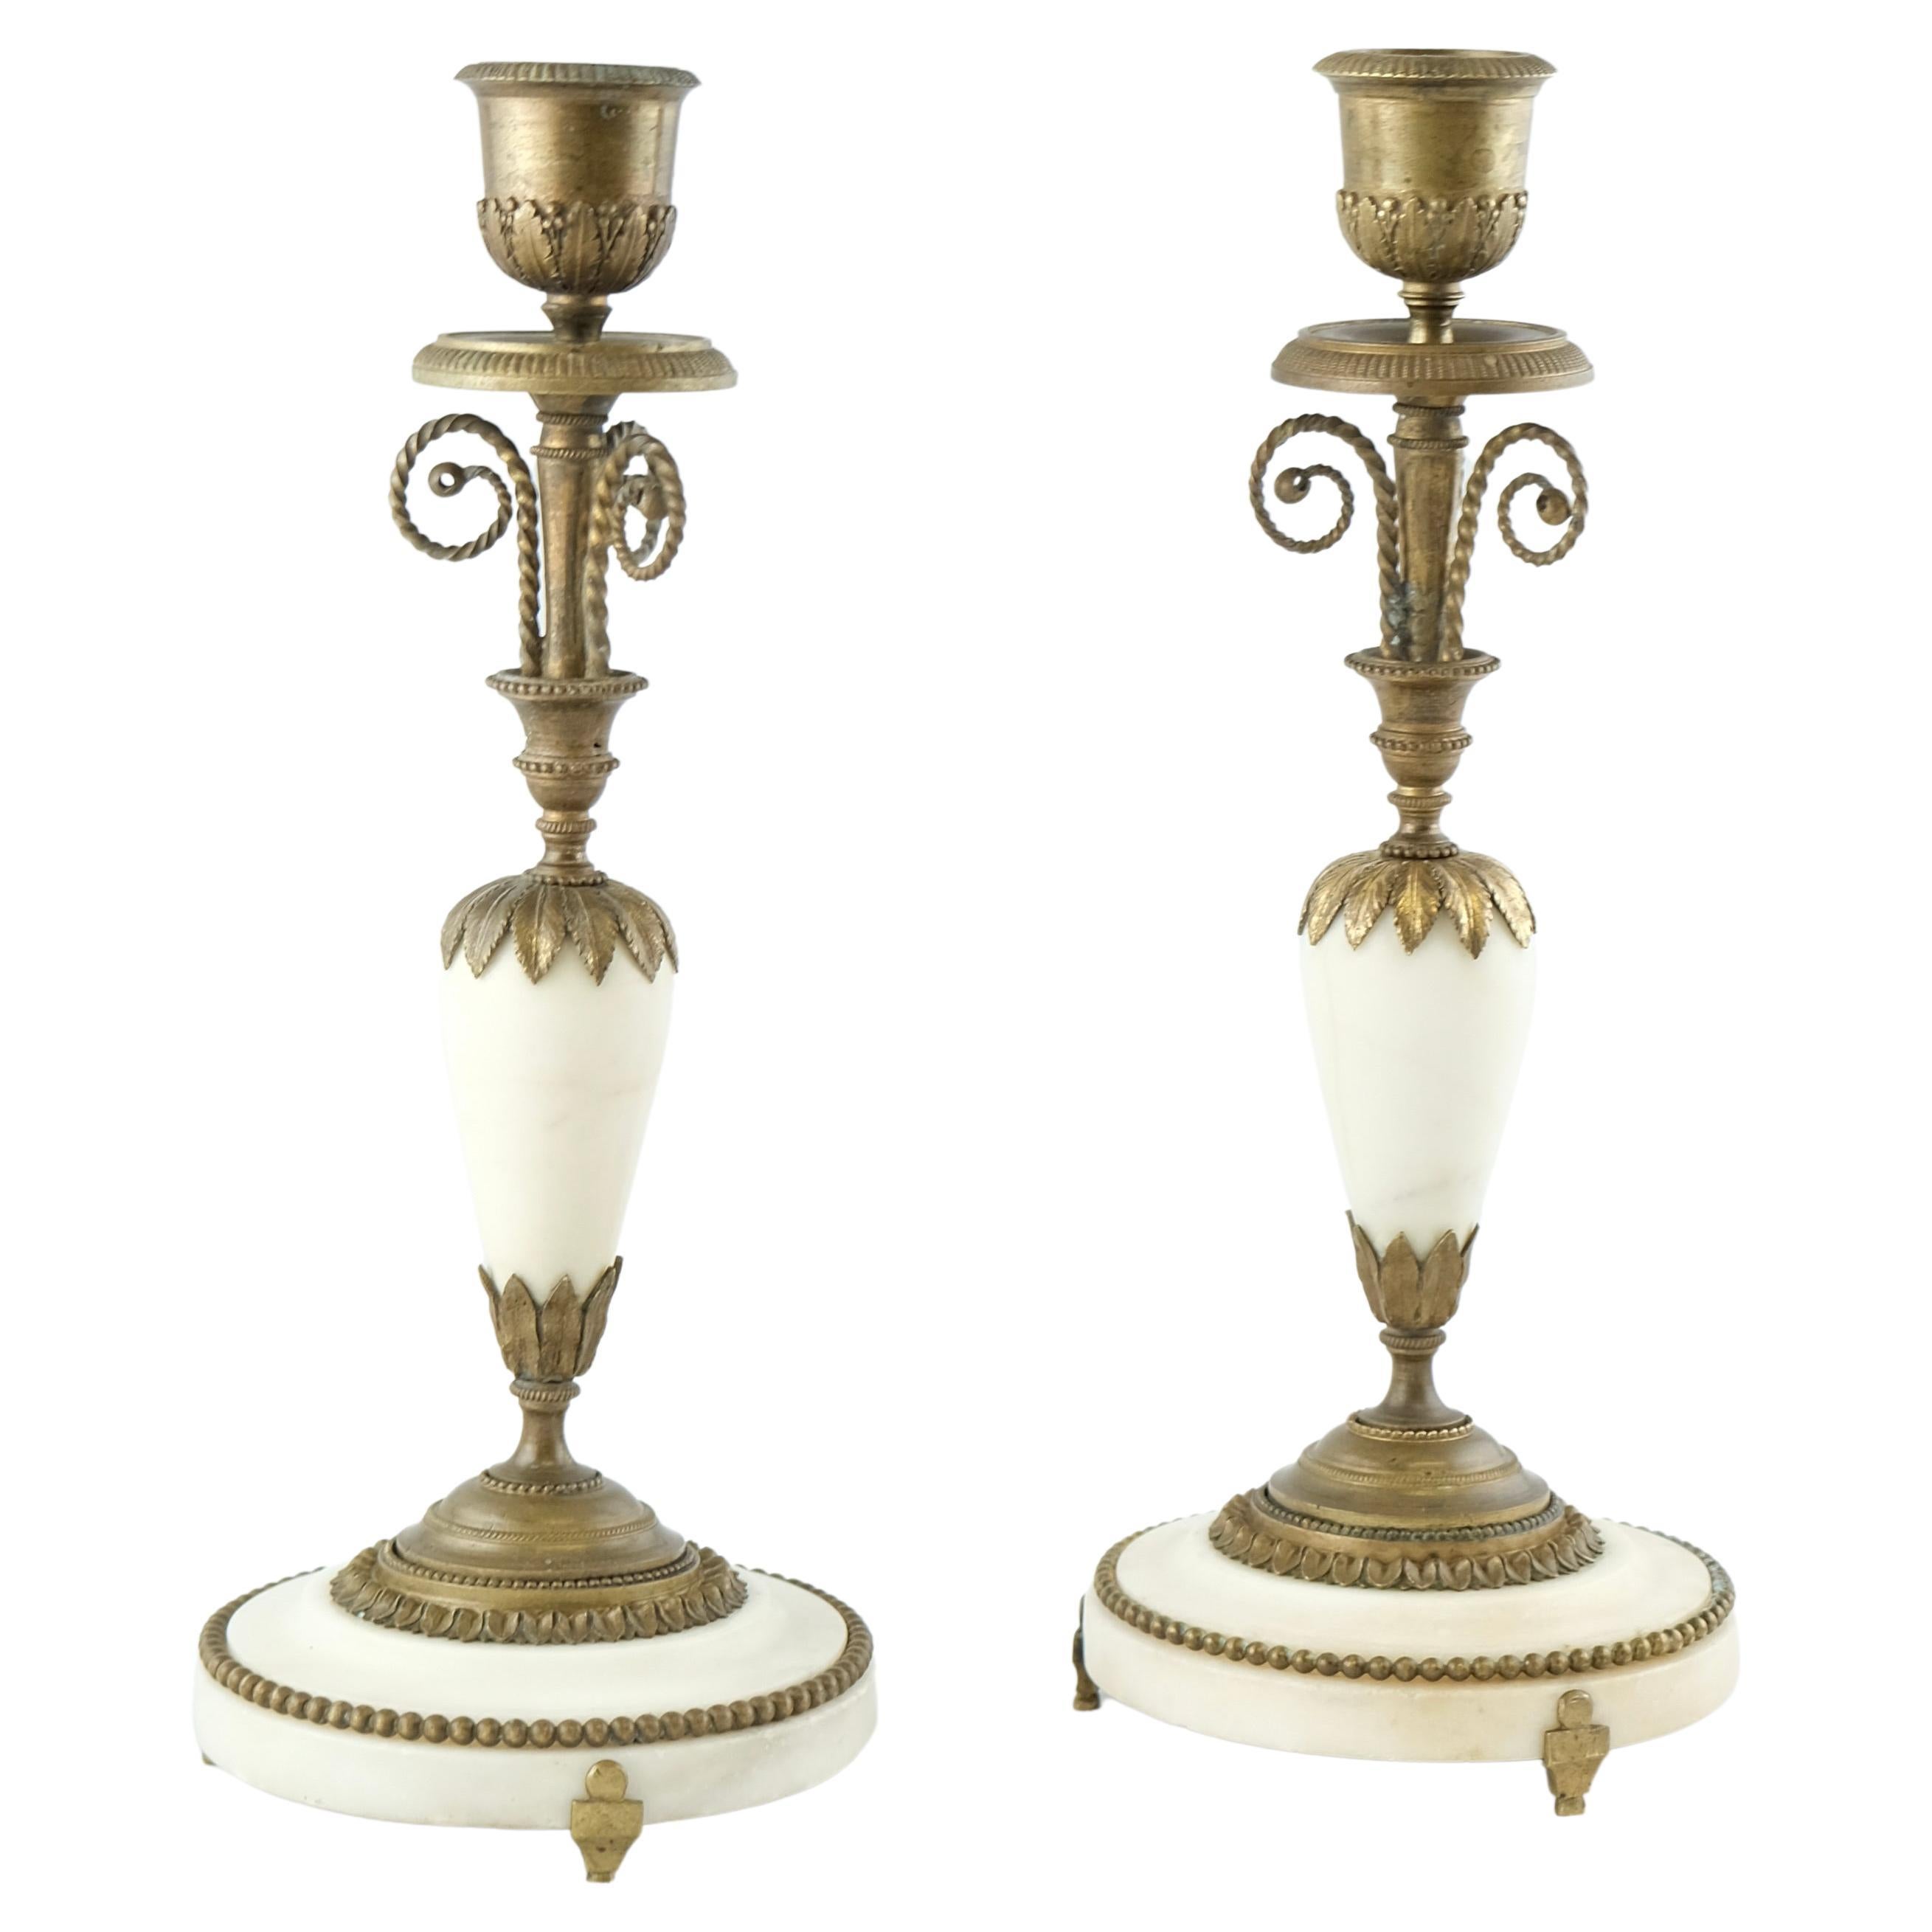 Pair of French Directoire Candlesticks Made in the 1790s